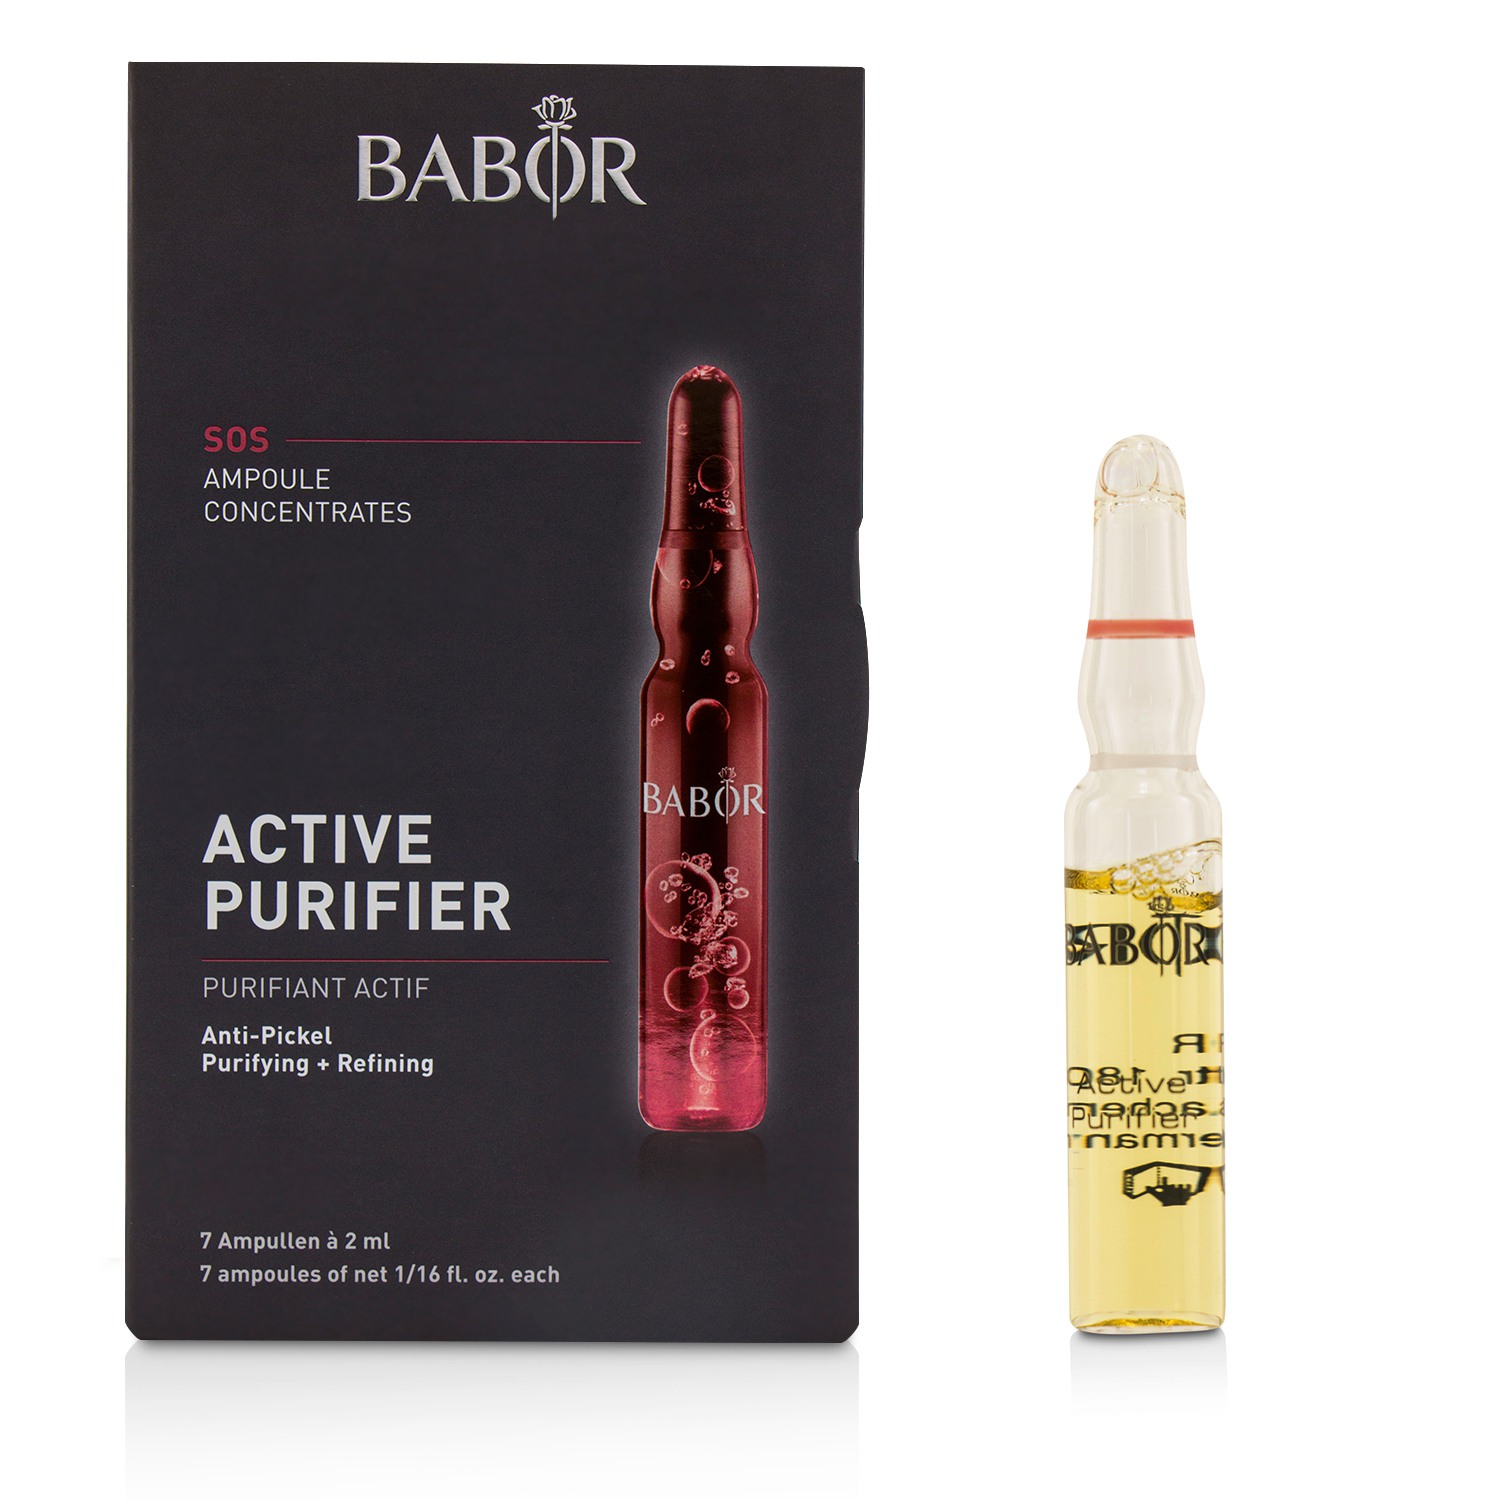 Ampoule Concentrates SOS Active Purifier (Purifying + Refining) - For Problematic Impure Skin Babor Image